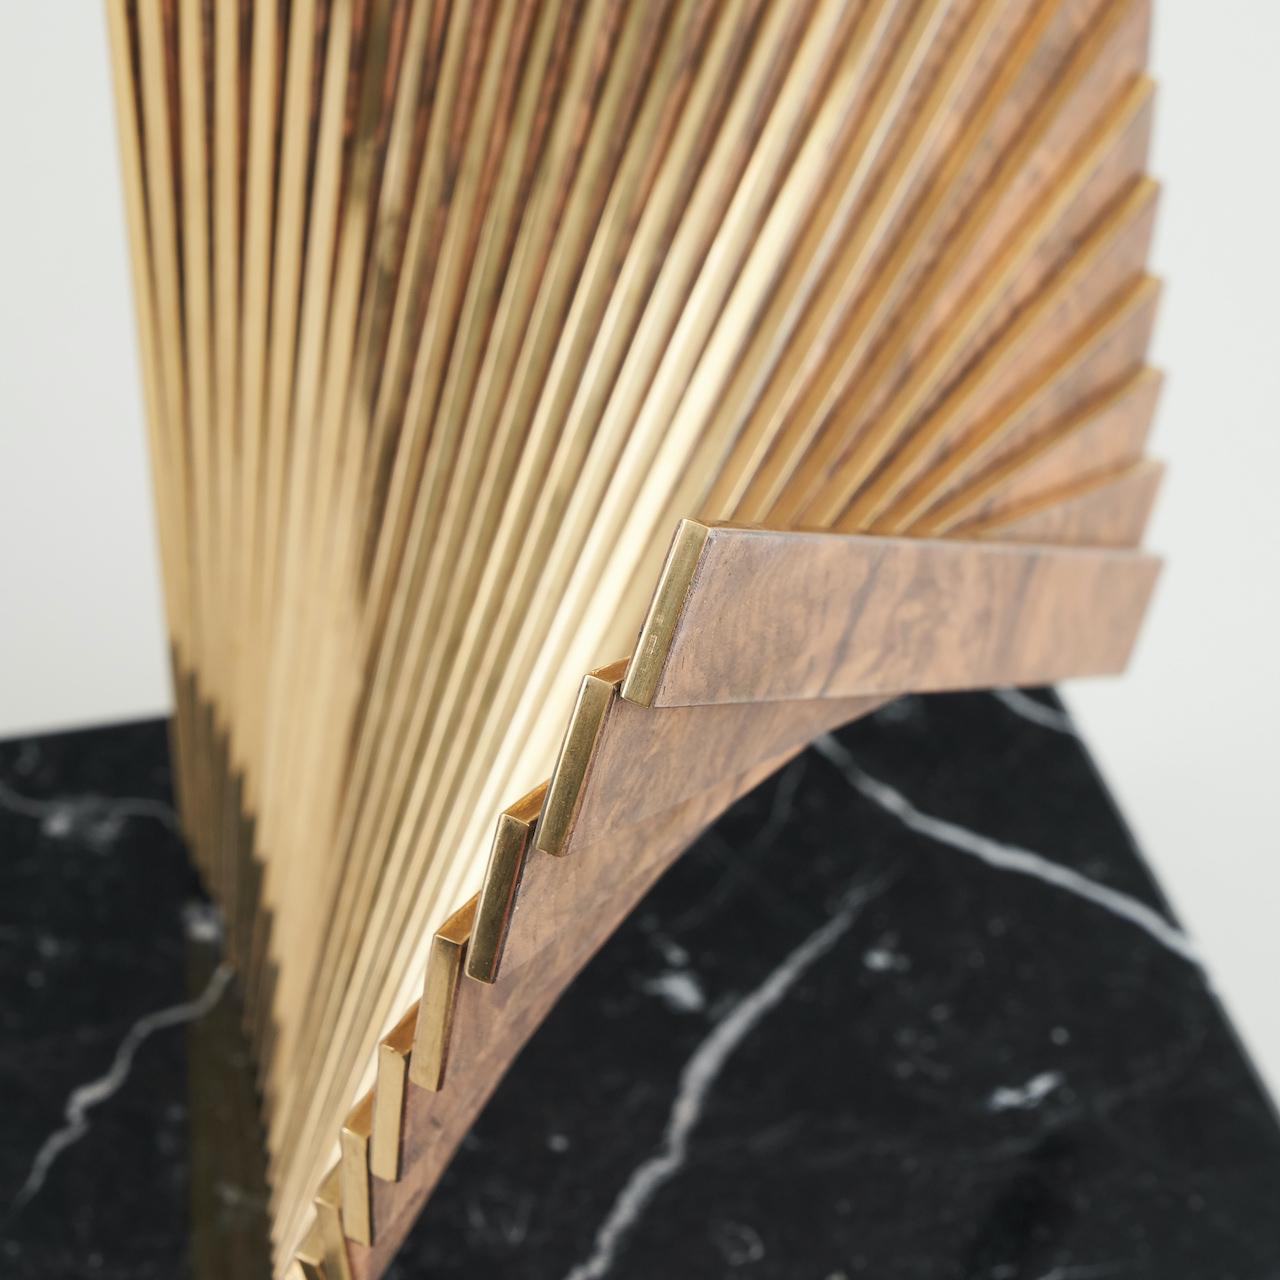 Parquetry Tabletop sculpture constructed from flitches of book-matched walnut and brass For Sale